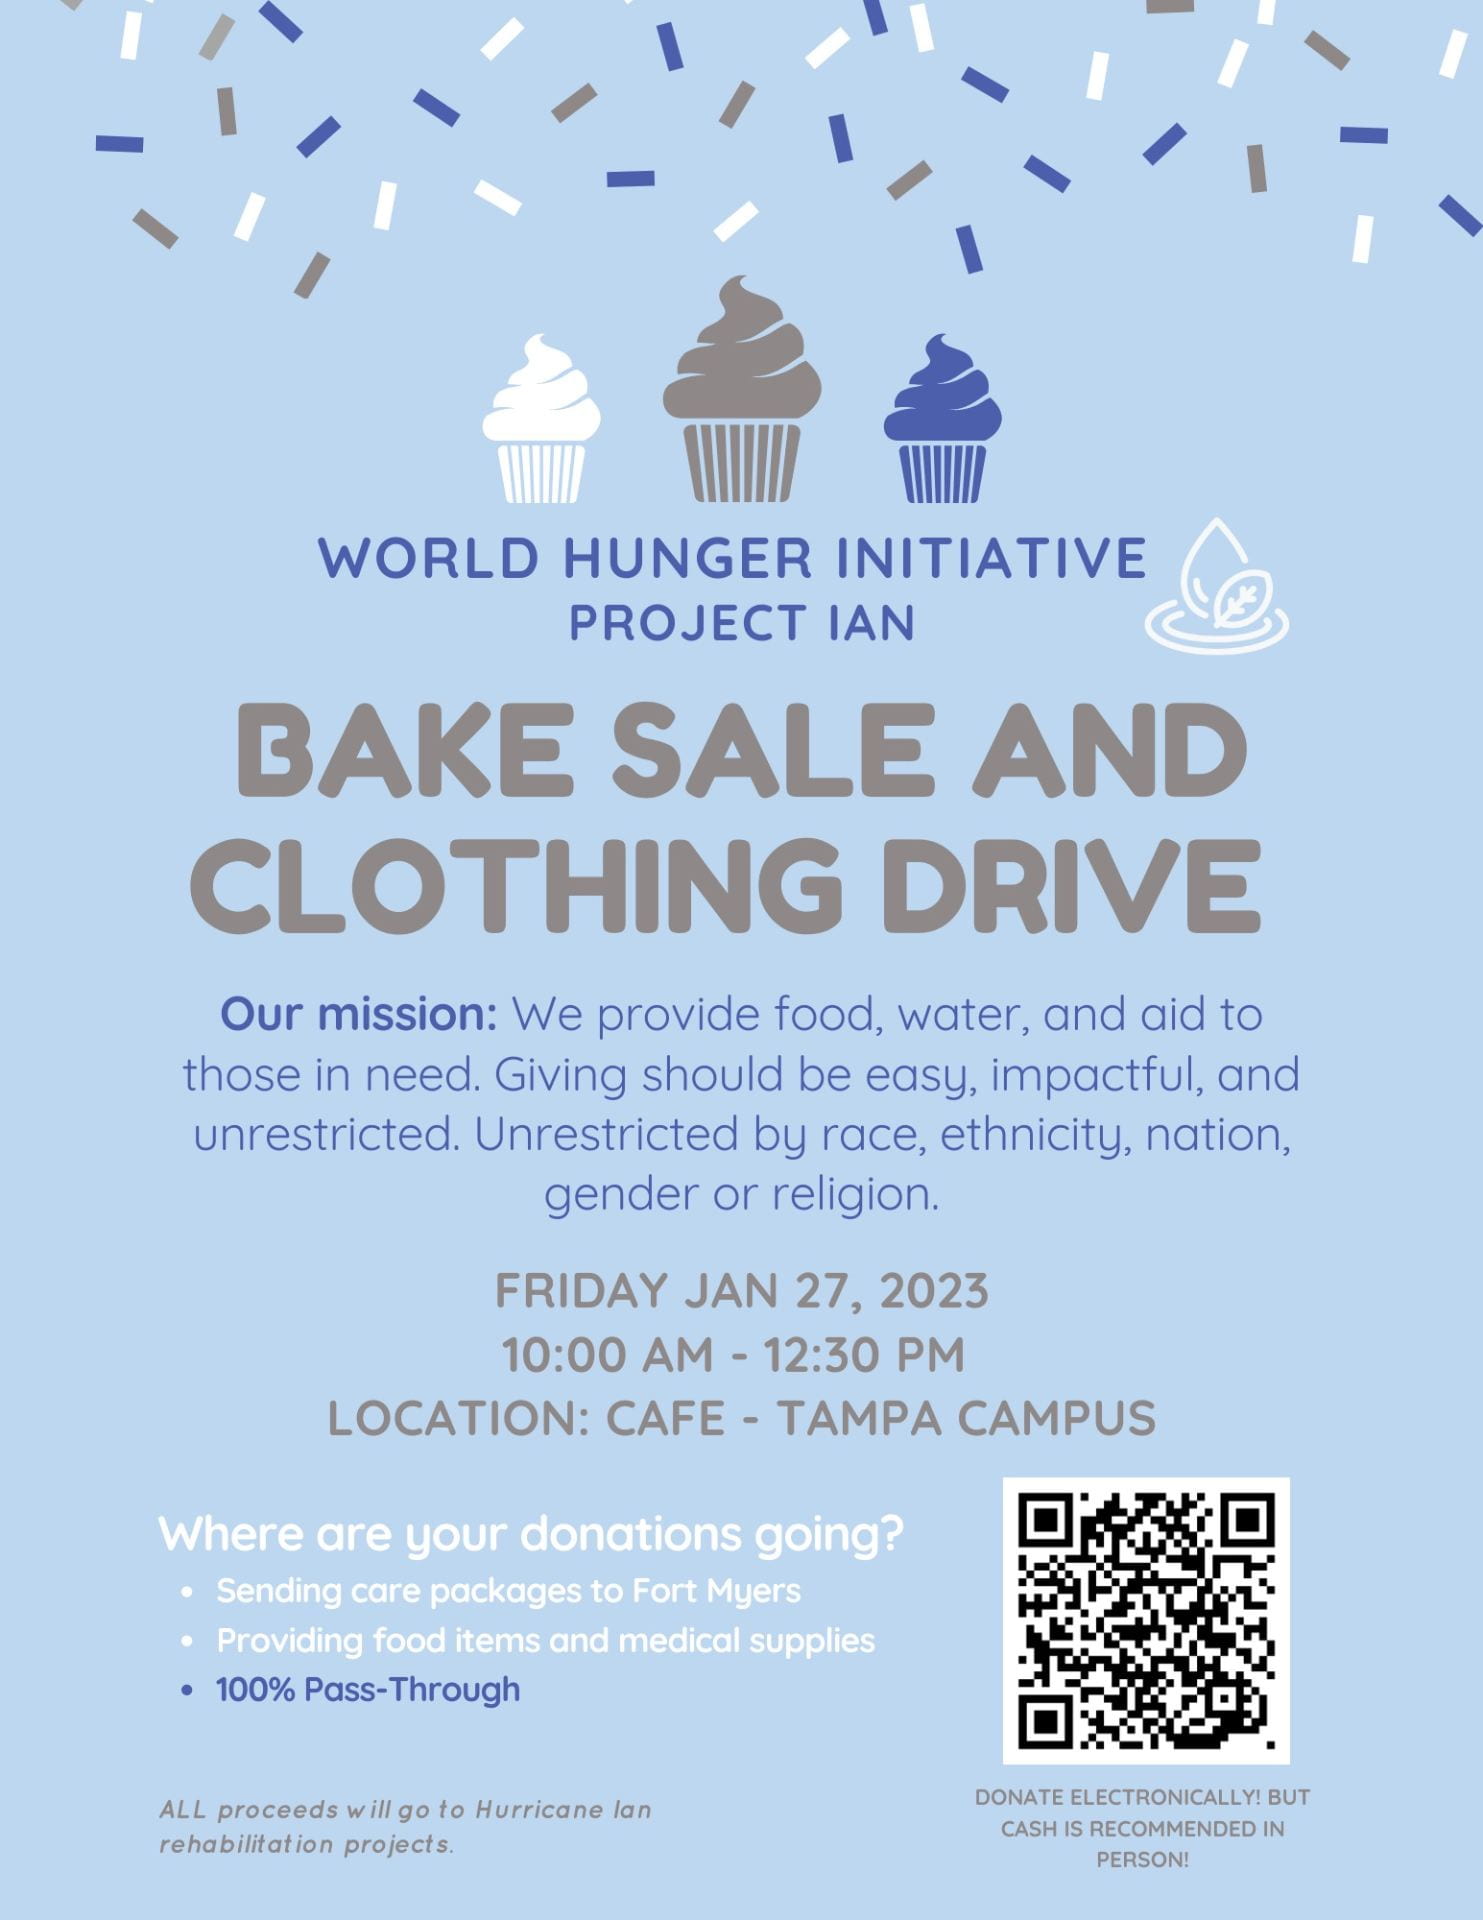 World Hunger Initiative Project Ian – Bake Sale and Clothing Drive